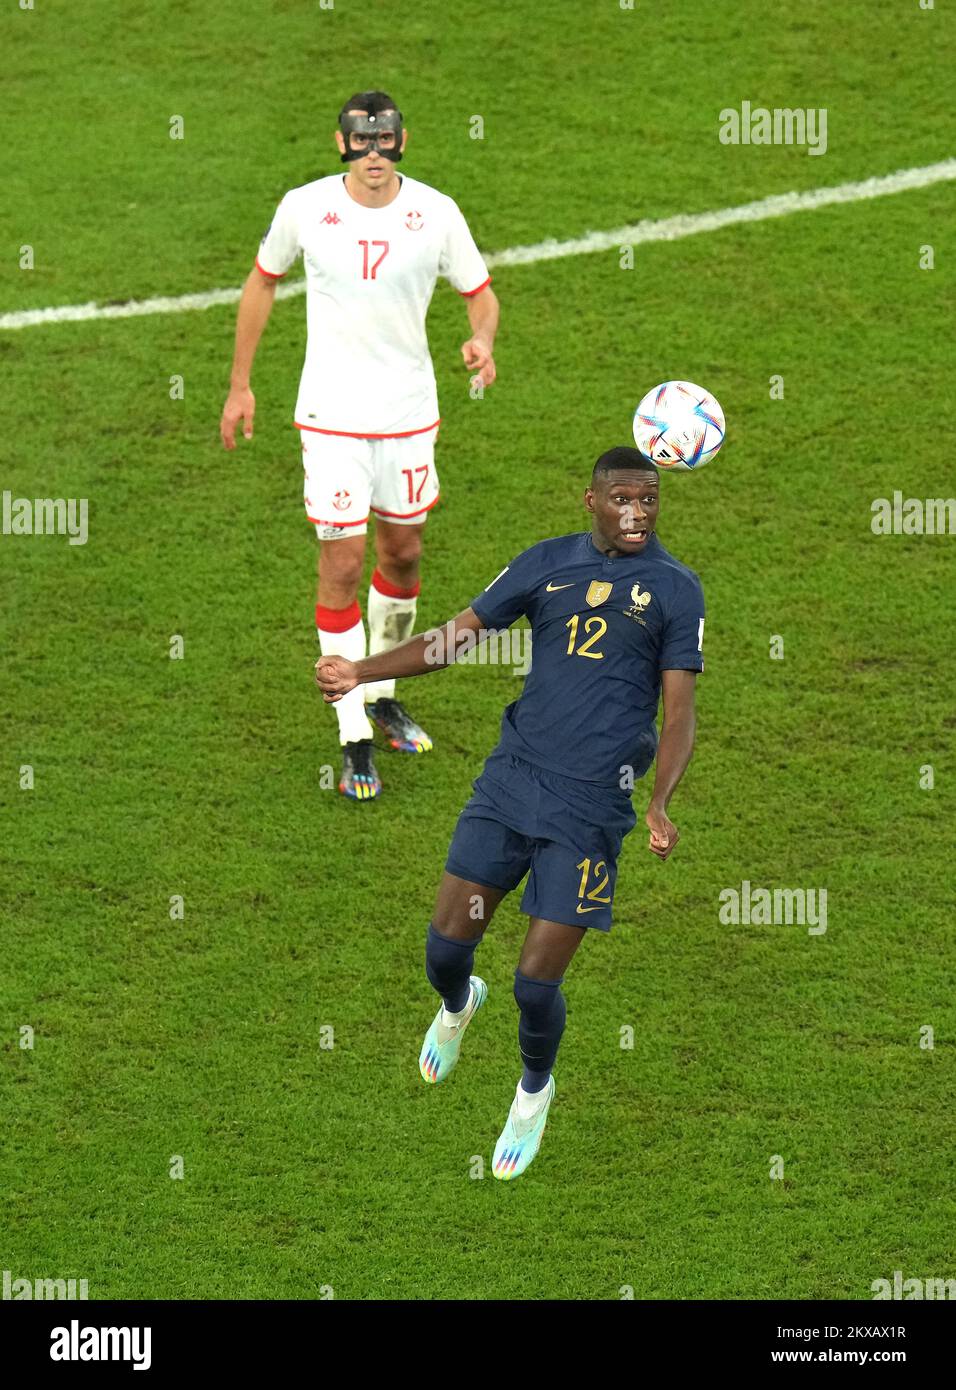 France's Randal Kolo Muani (right) heads the ball clear from Tunisia's Ellyes Skhiri during the FIFA World Cup Group D match at the Education City Stadium in Al Rayyan, Qatar. Picture date: Wednesday November 30, 2022. Stock Photo